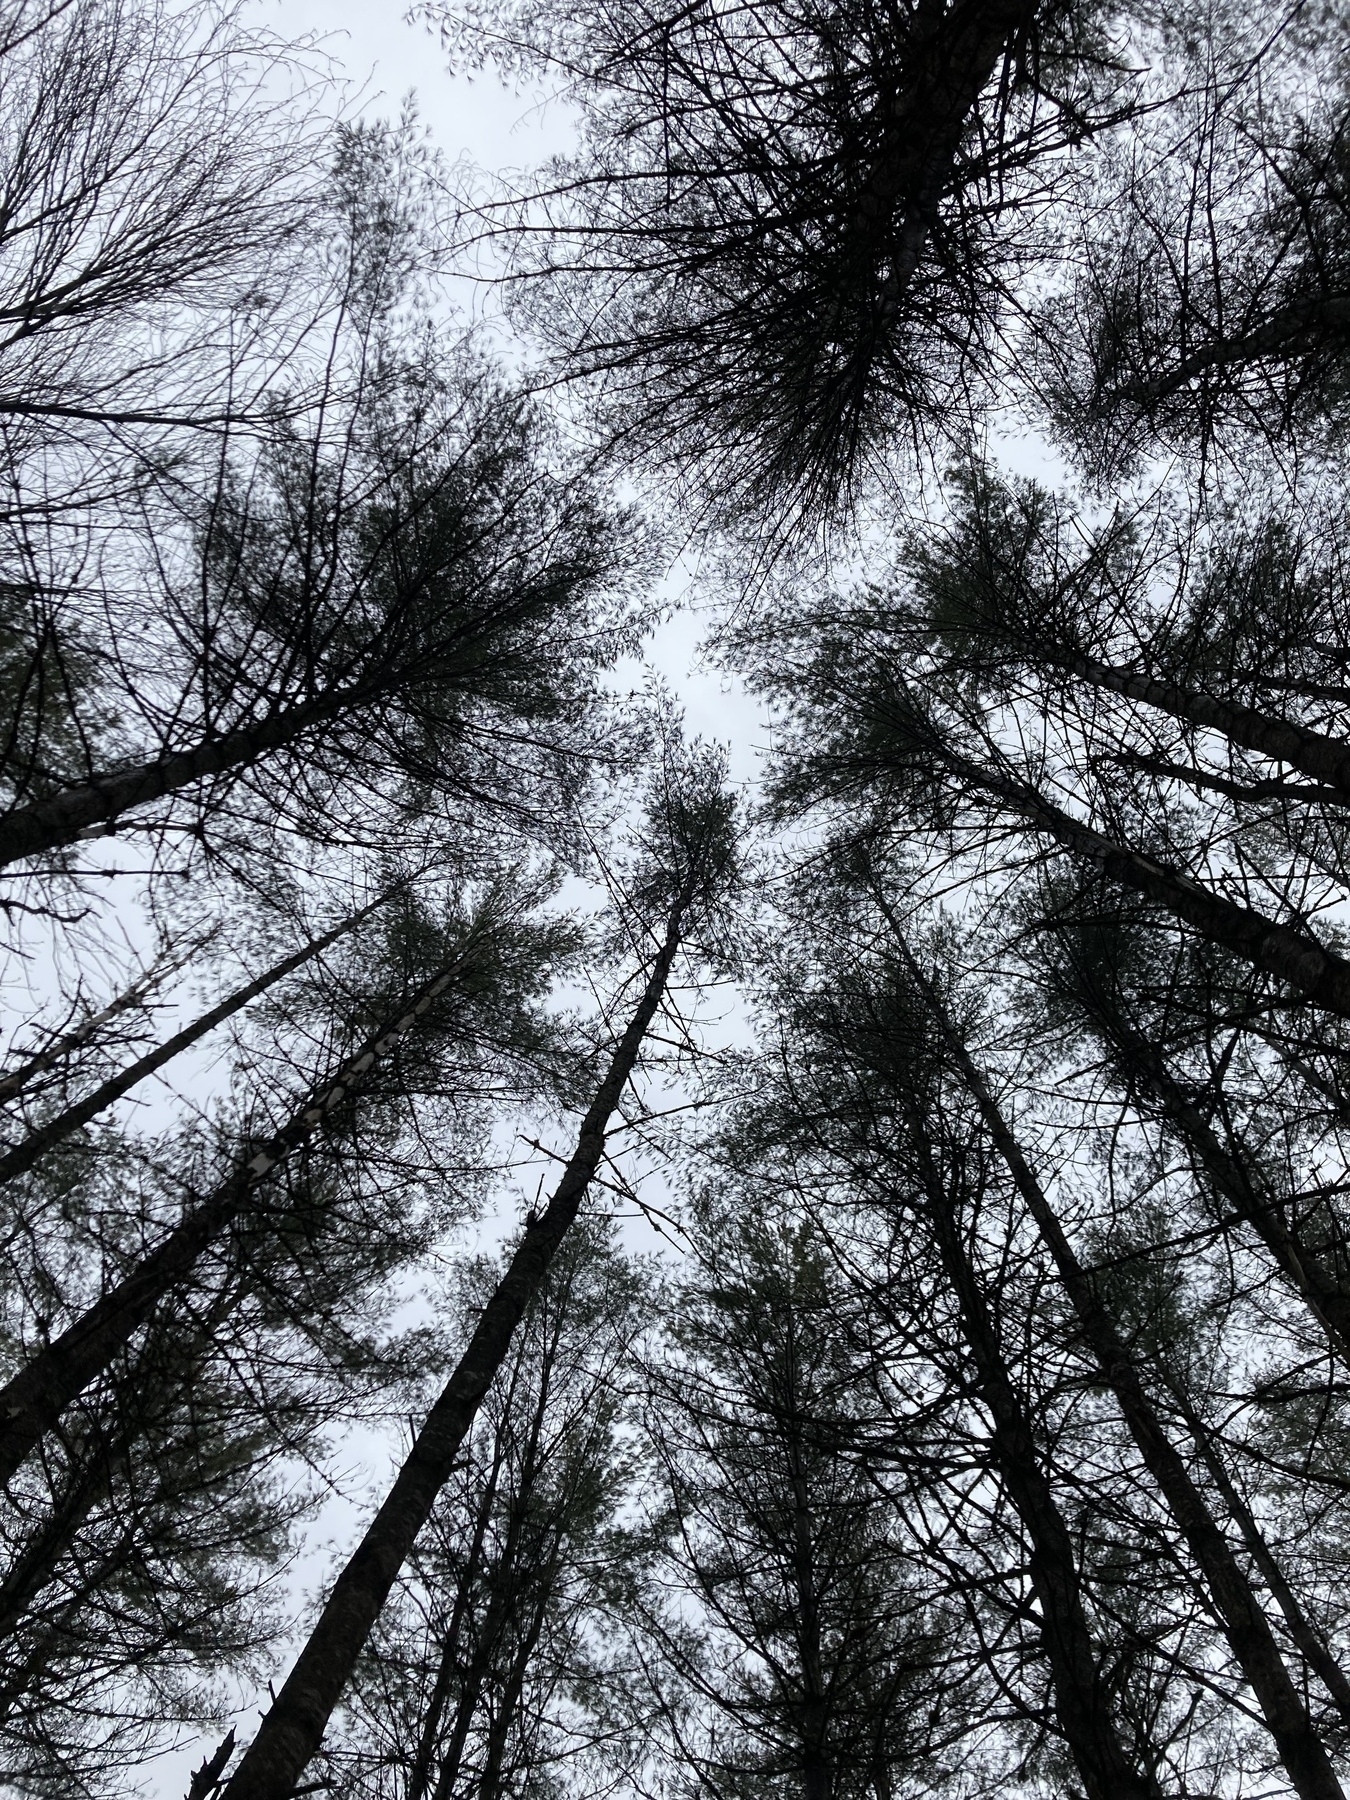 Looking up at the sky in a forest